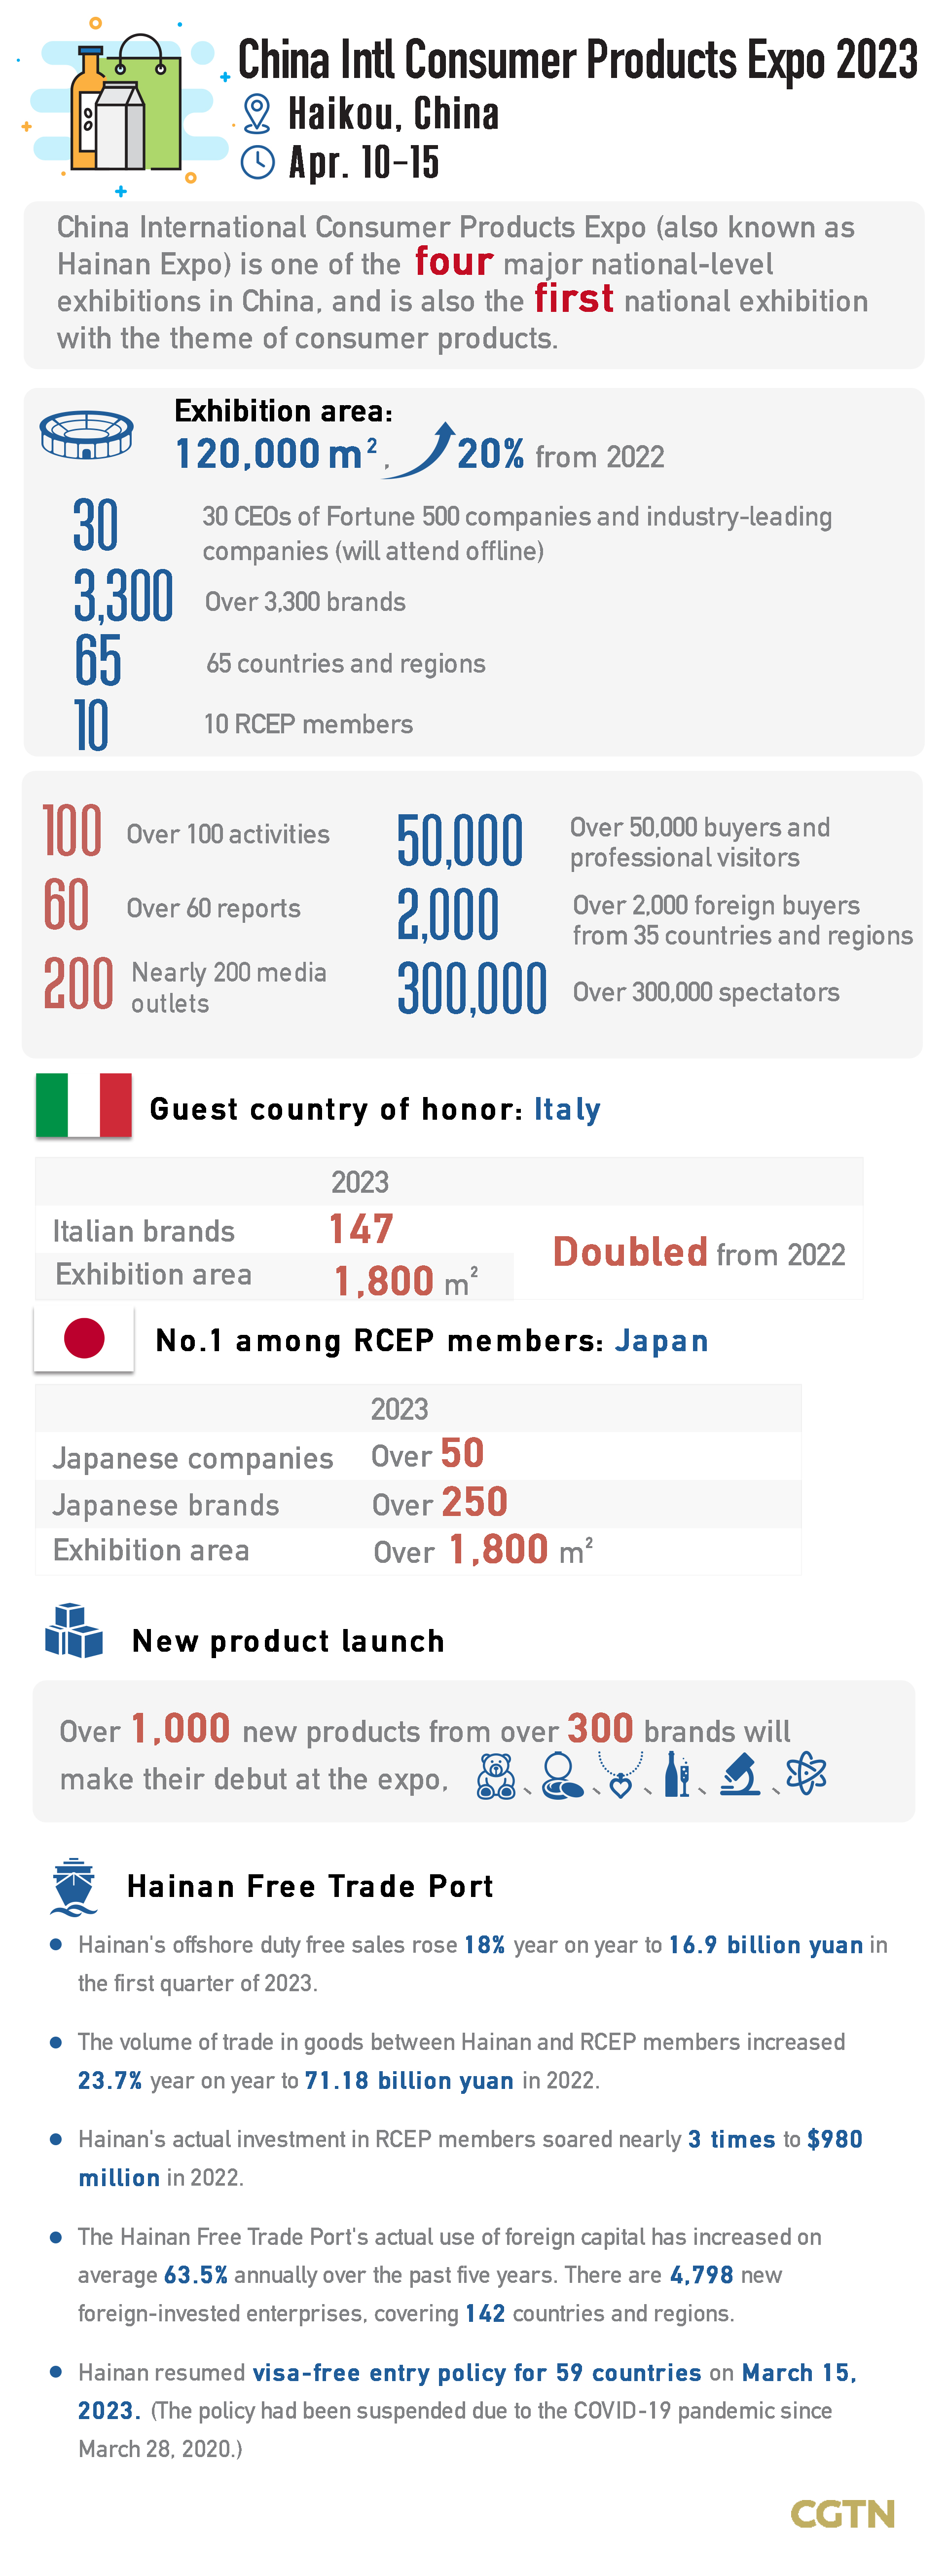 Graphics: A sneak peek at China Intl Consumer Products Expo 2023